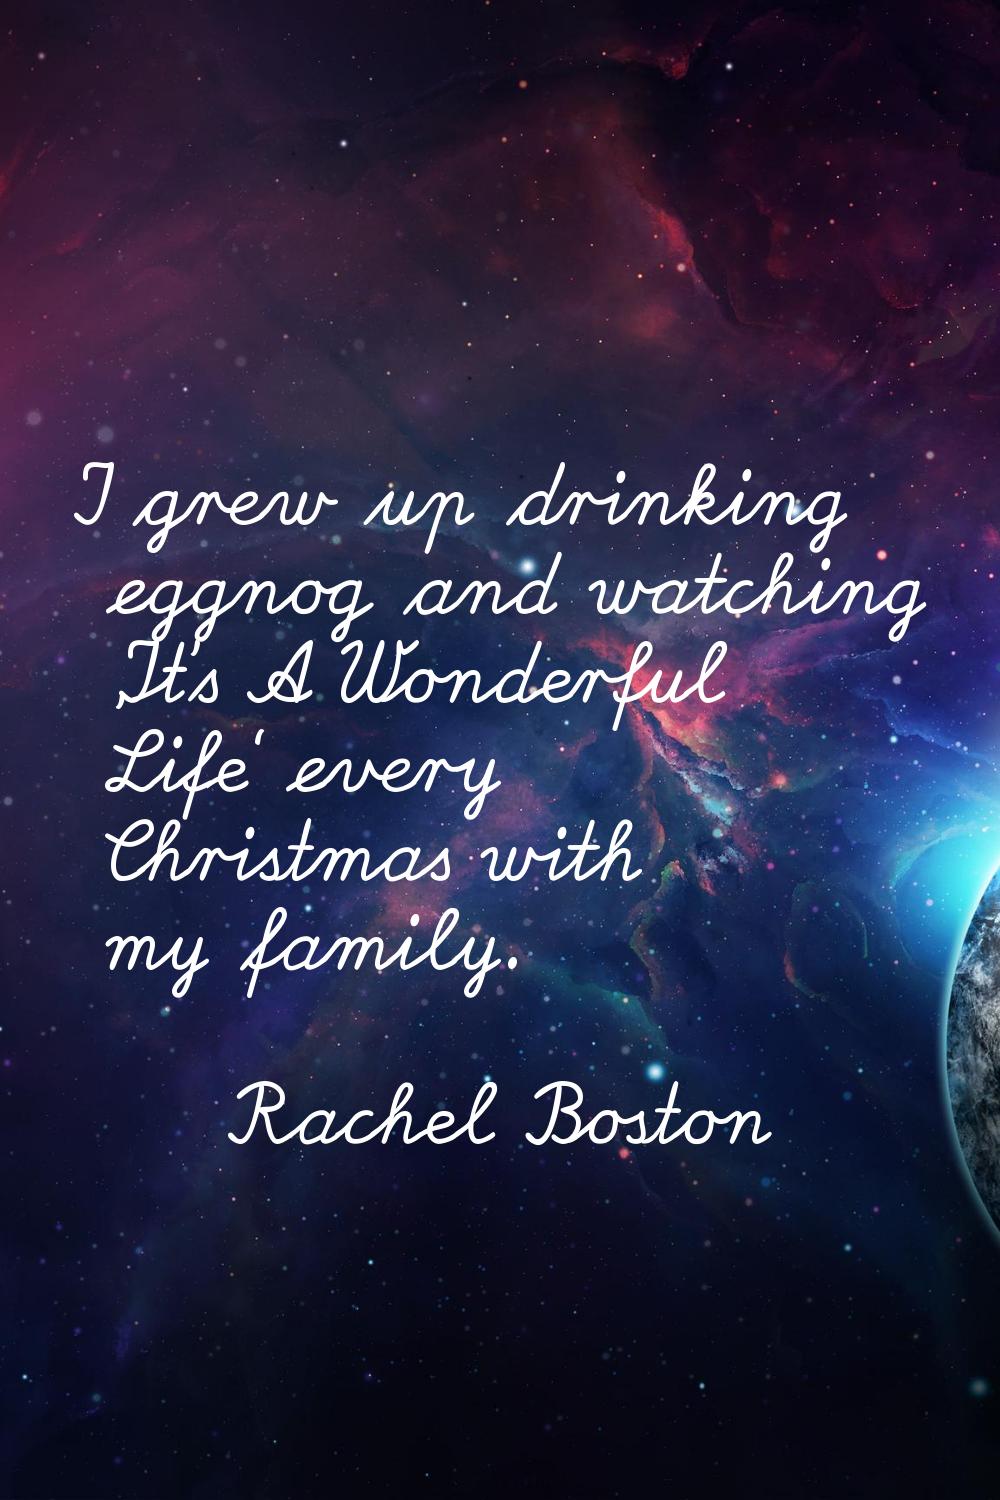 I grew up drinking eggnog and watching 'It's A Wonderful Life' every Christmas with my family.